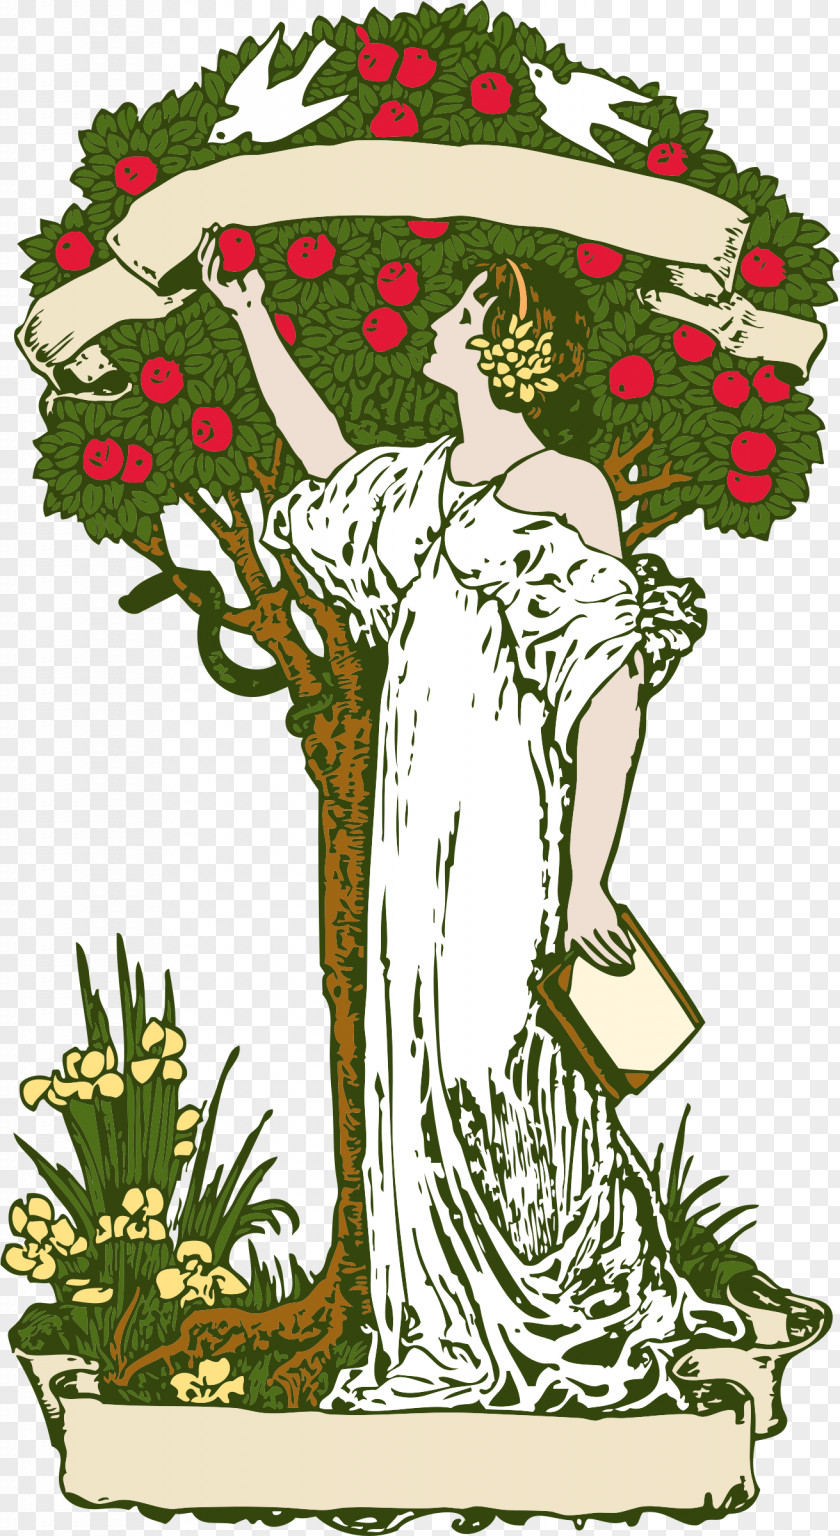 Women Tree Cliparts Book Of Genesis The Knowledge Good And Evil Life Clip Art PNG